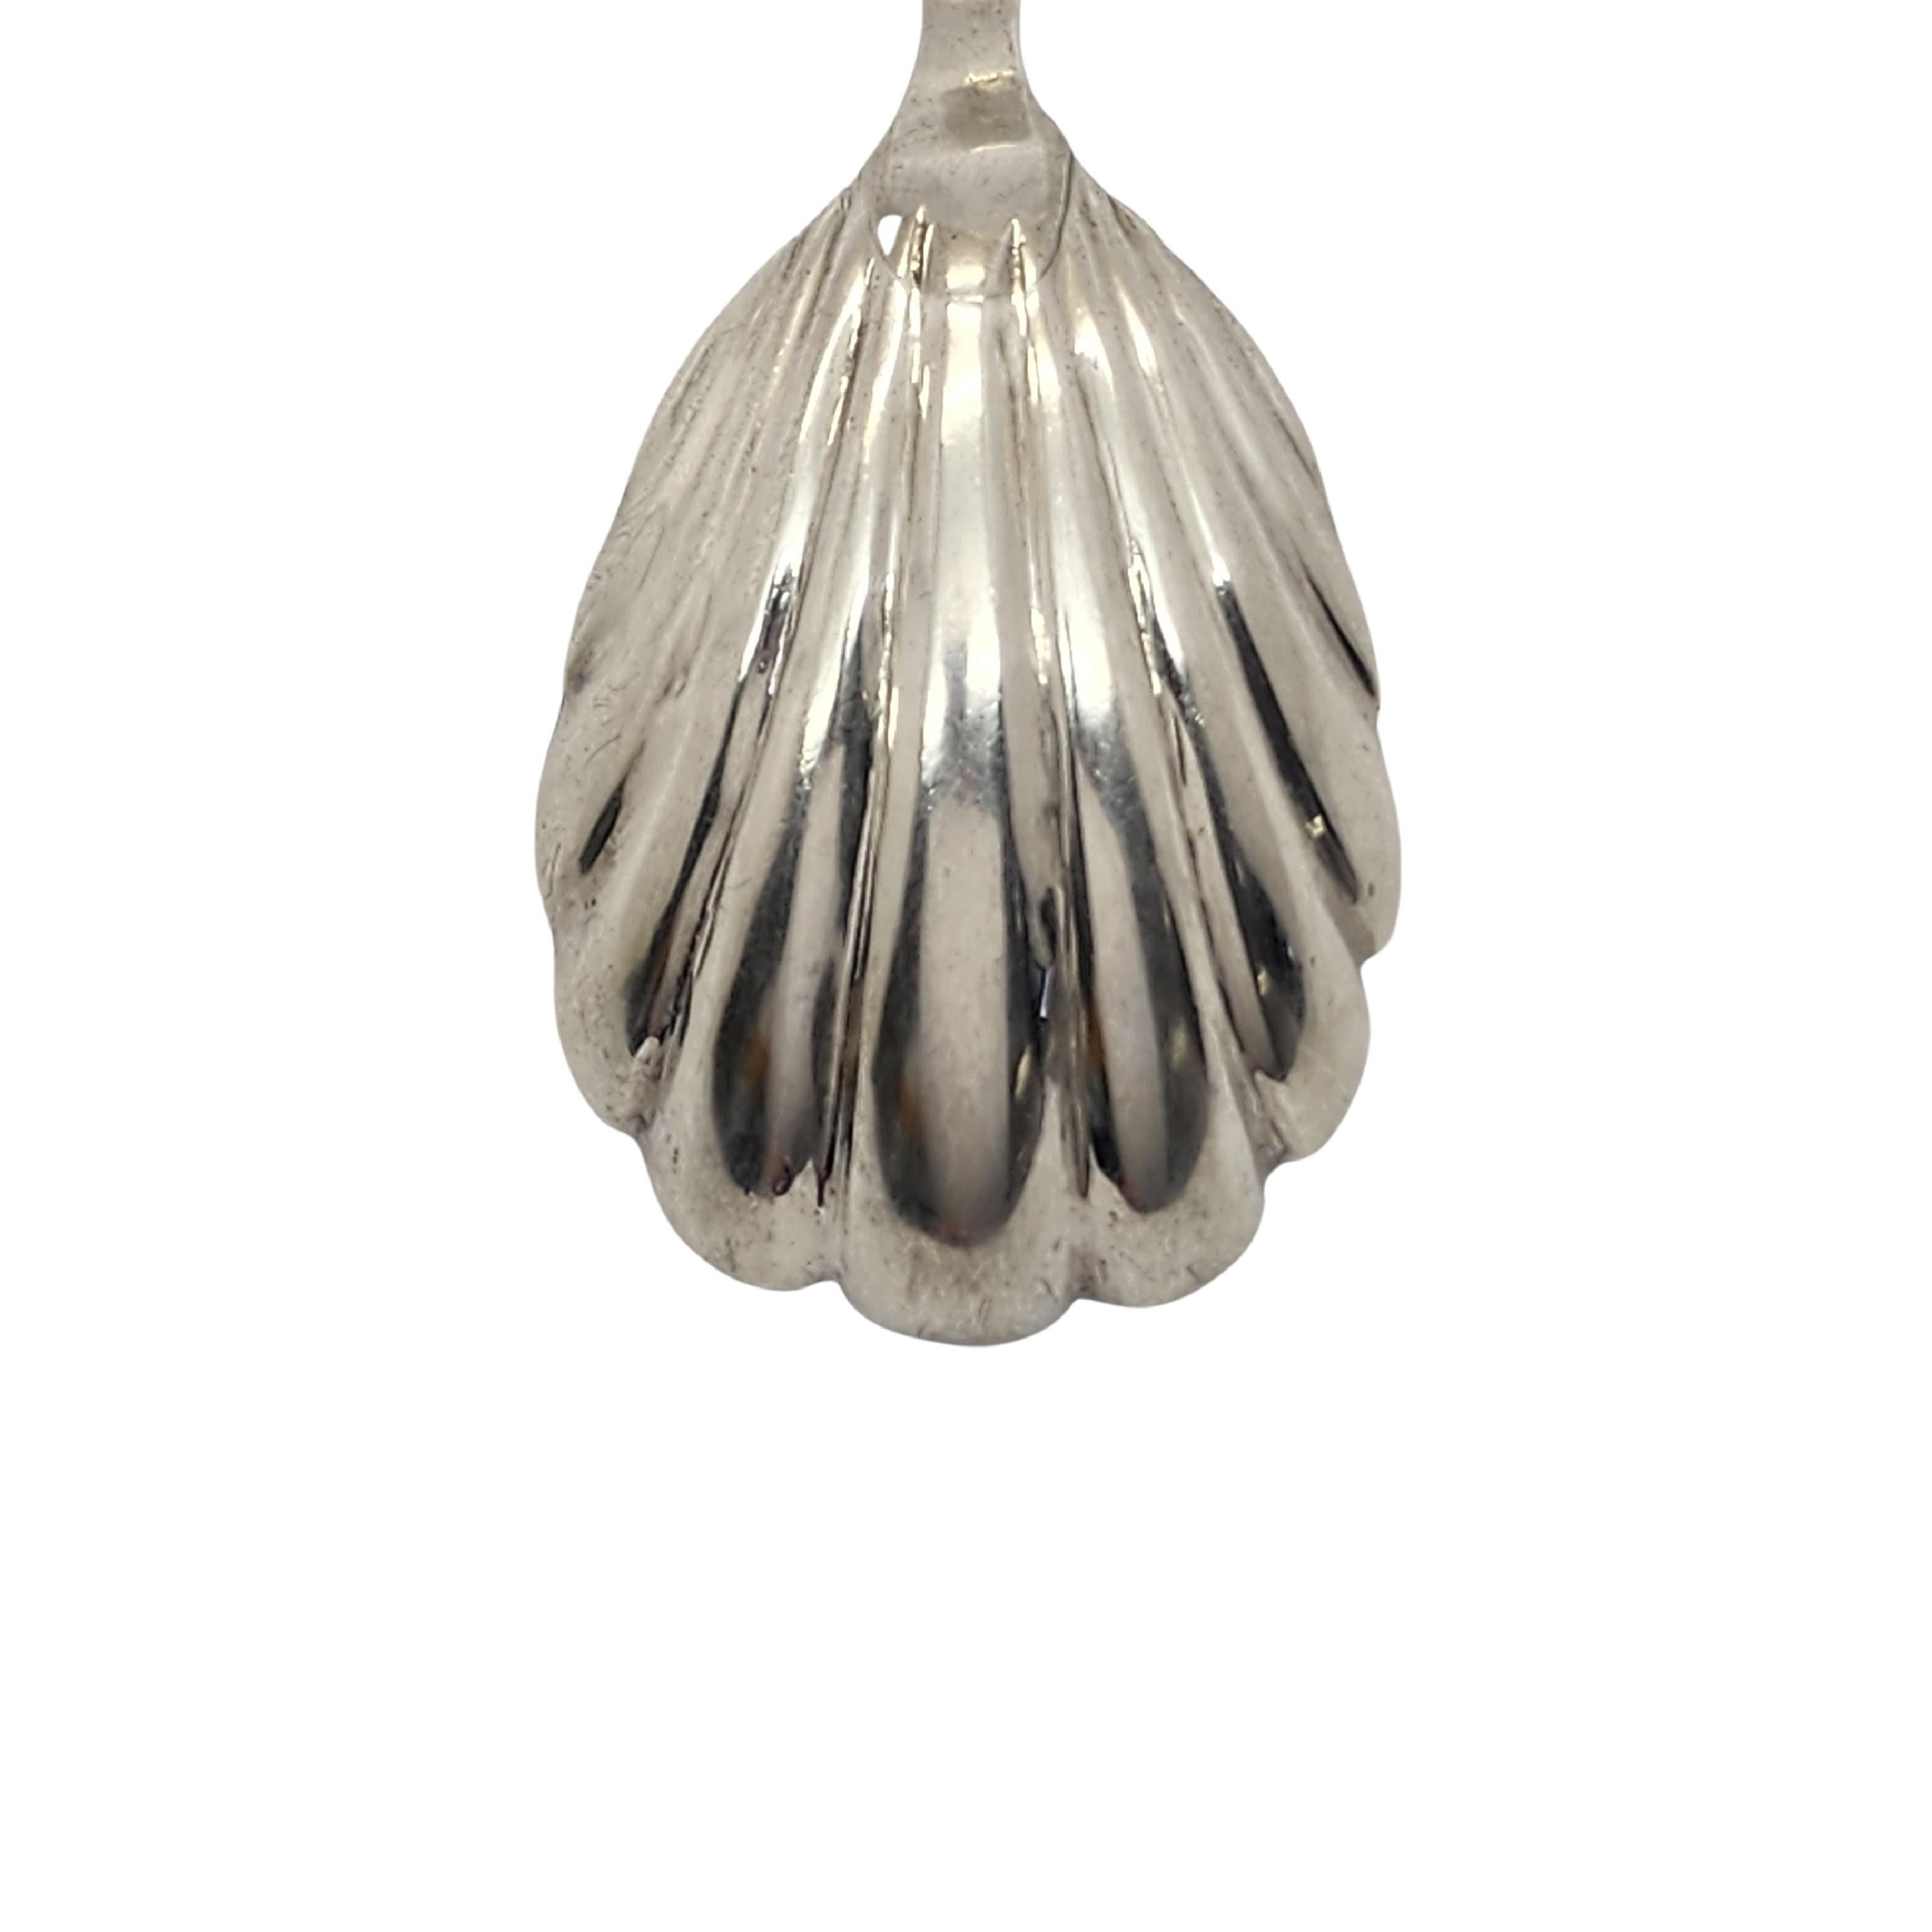 Antique Richard Crossley London English Sterling Tea Caddy Shell Bowl Spoon For Sale 2